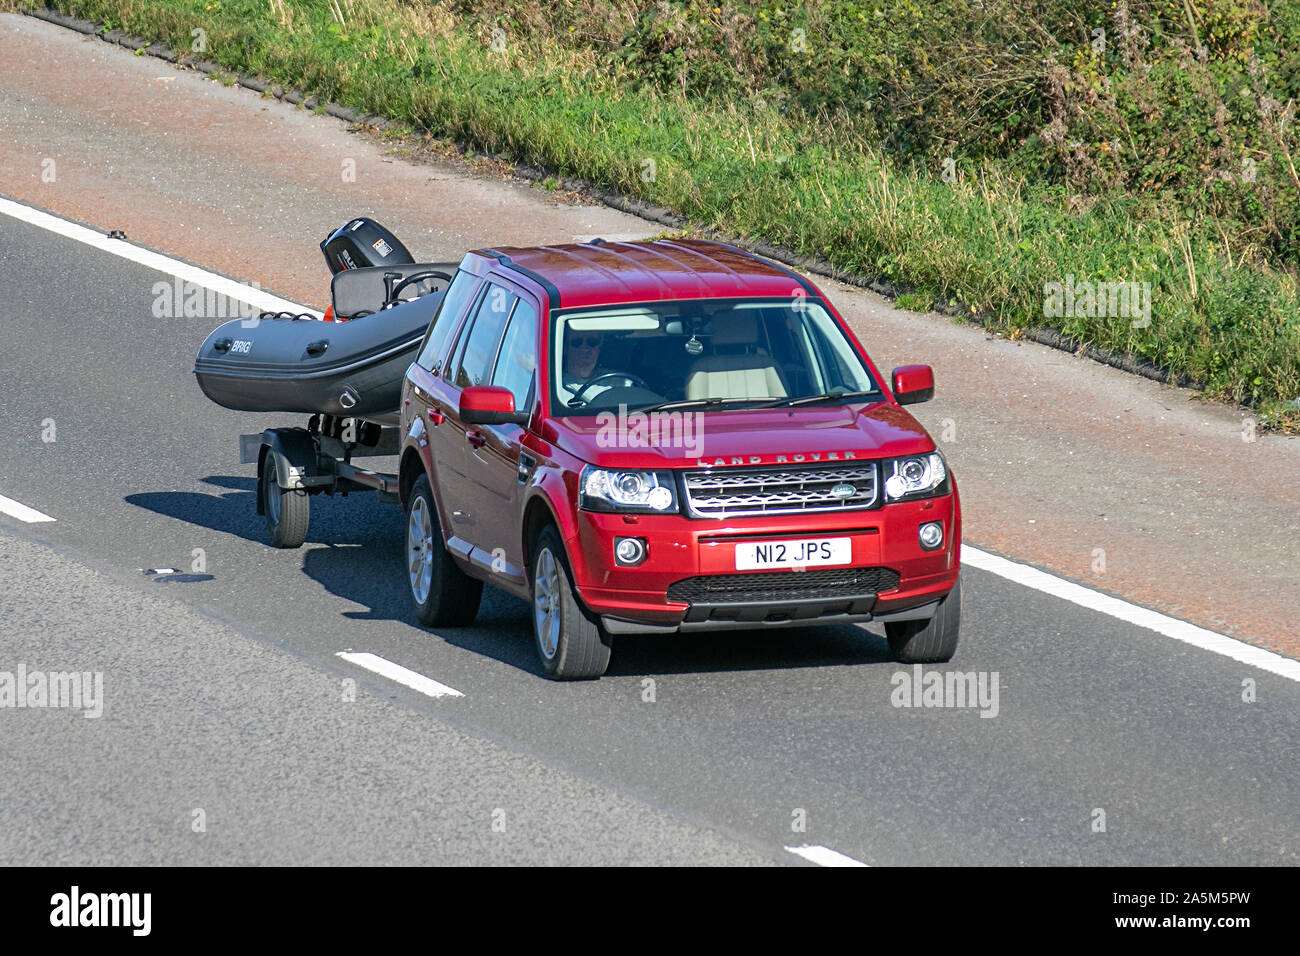 2014 red Land Rover Freelander SE SD4 Auto towing boat trailer; UK Vehicular traffic, transport, modern, saloon cars, south-bound on the 3 lane M6 motorway highway. Stock Photo